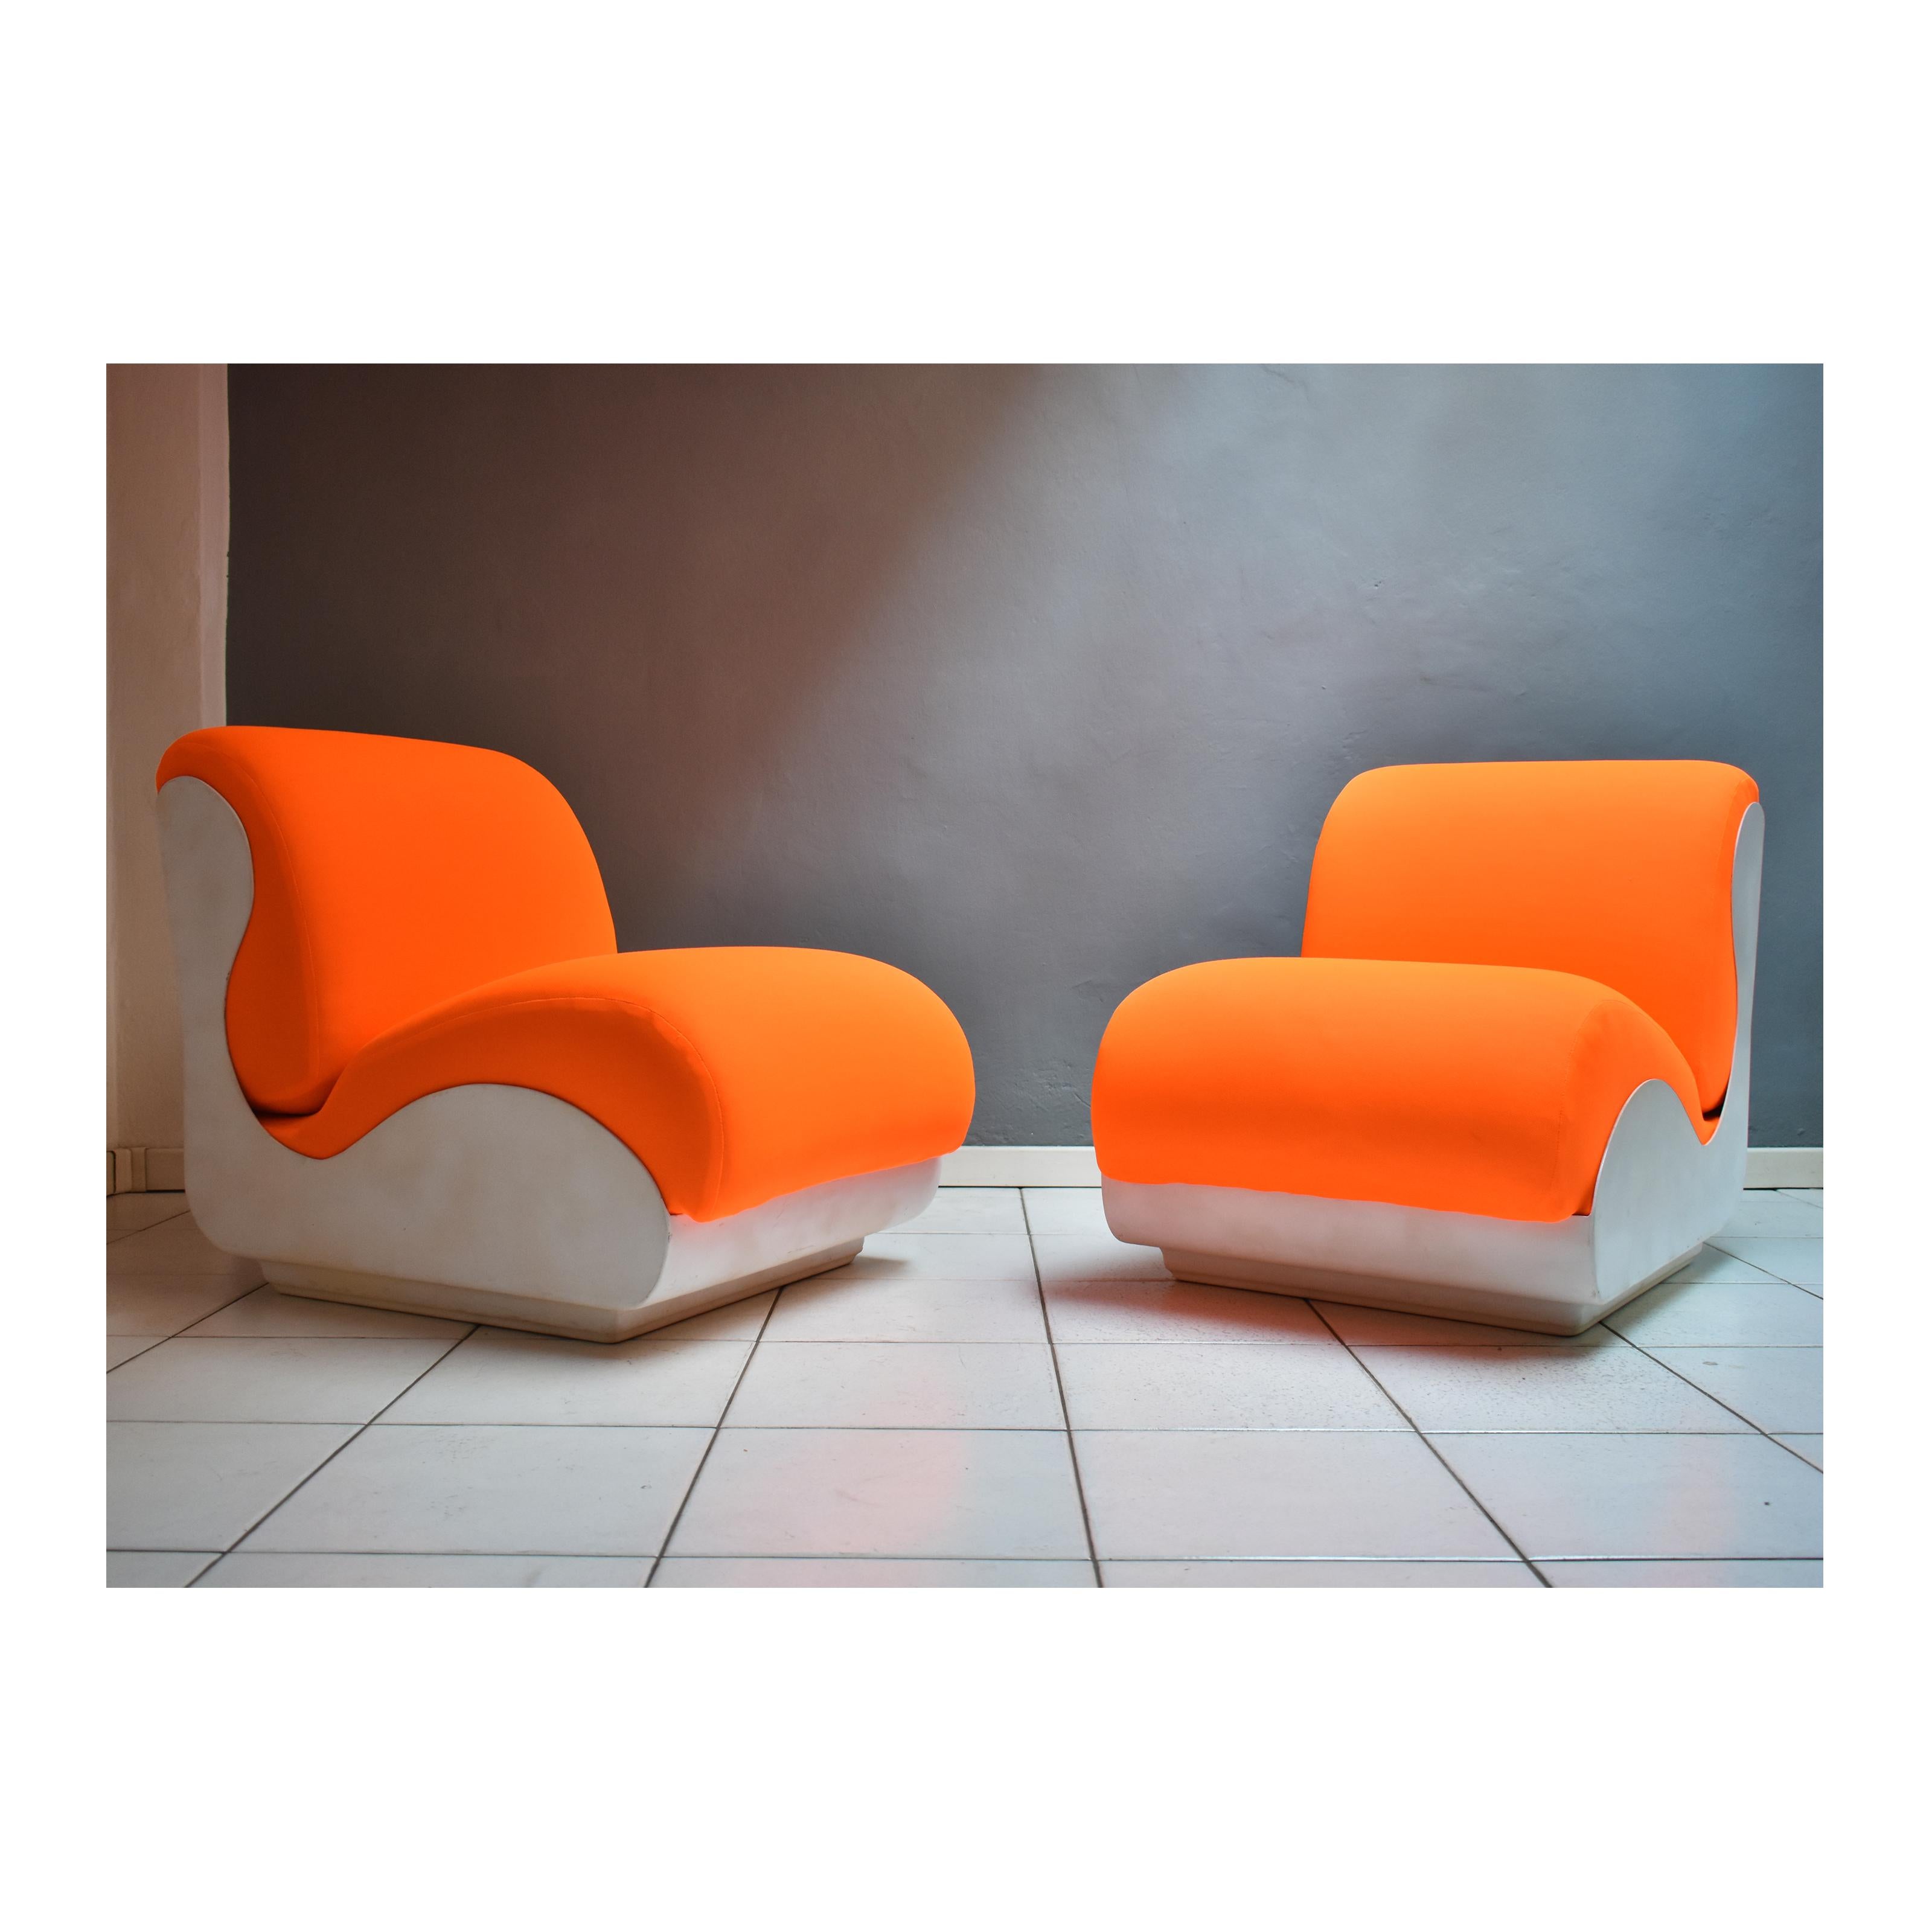 Late 20th Century Mid-Century Modern Italian, 1970s Set of 2 Armchairs orange fluo white structure For Sale